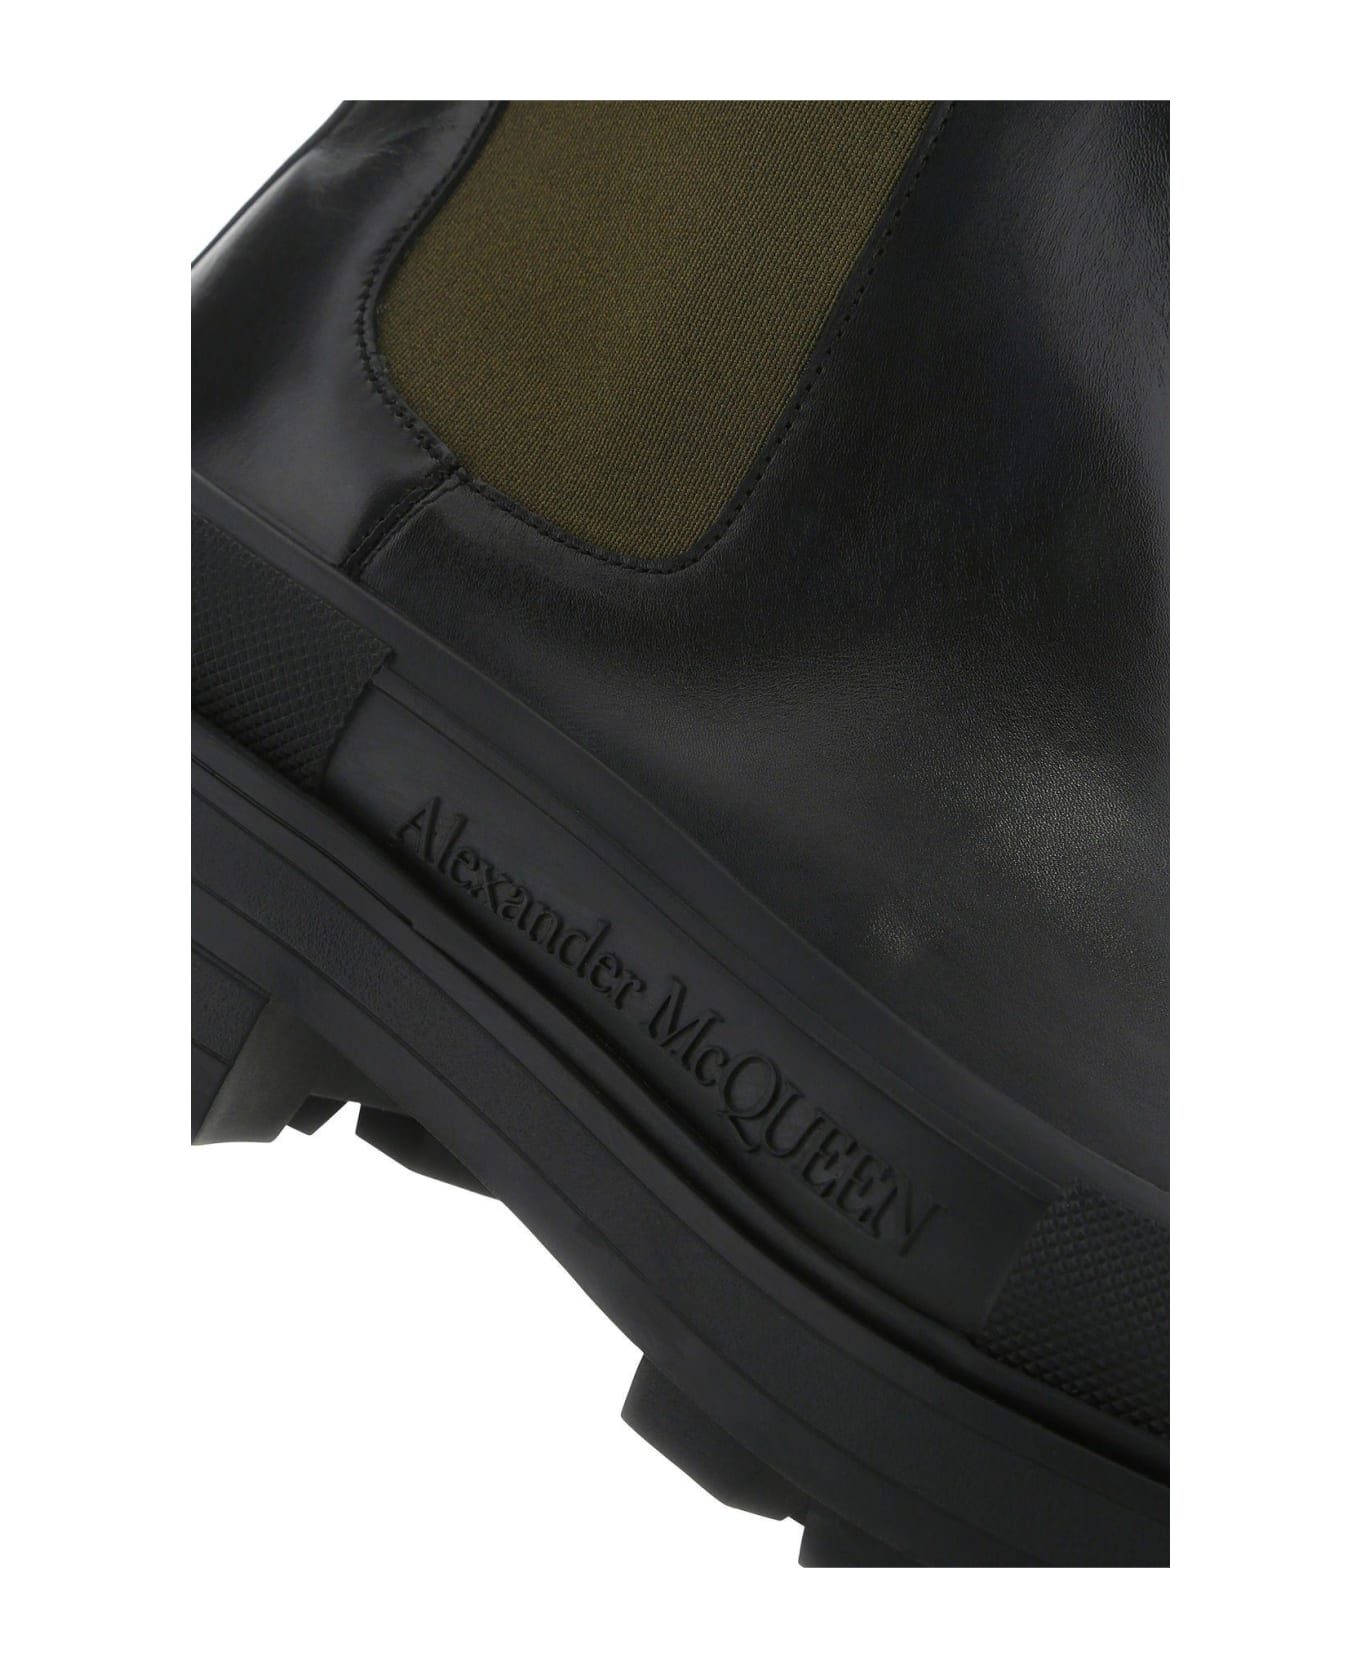 Alexander McQueen Black Leather Boxcar Ankle Boots - BLACK ブーツ